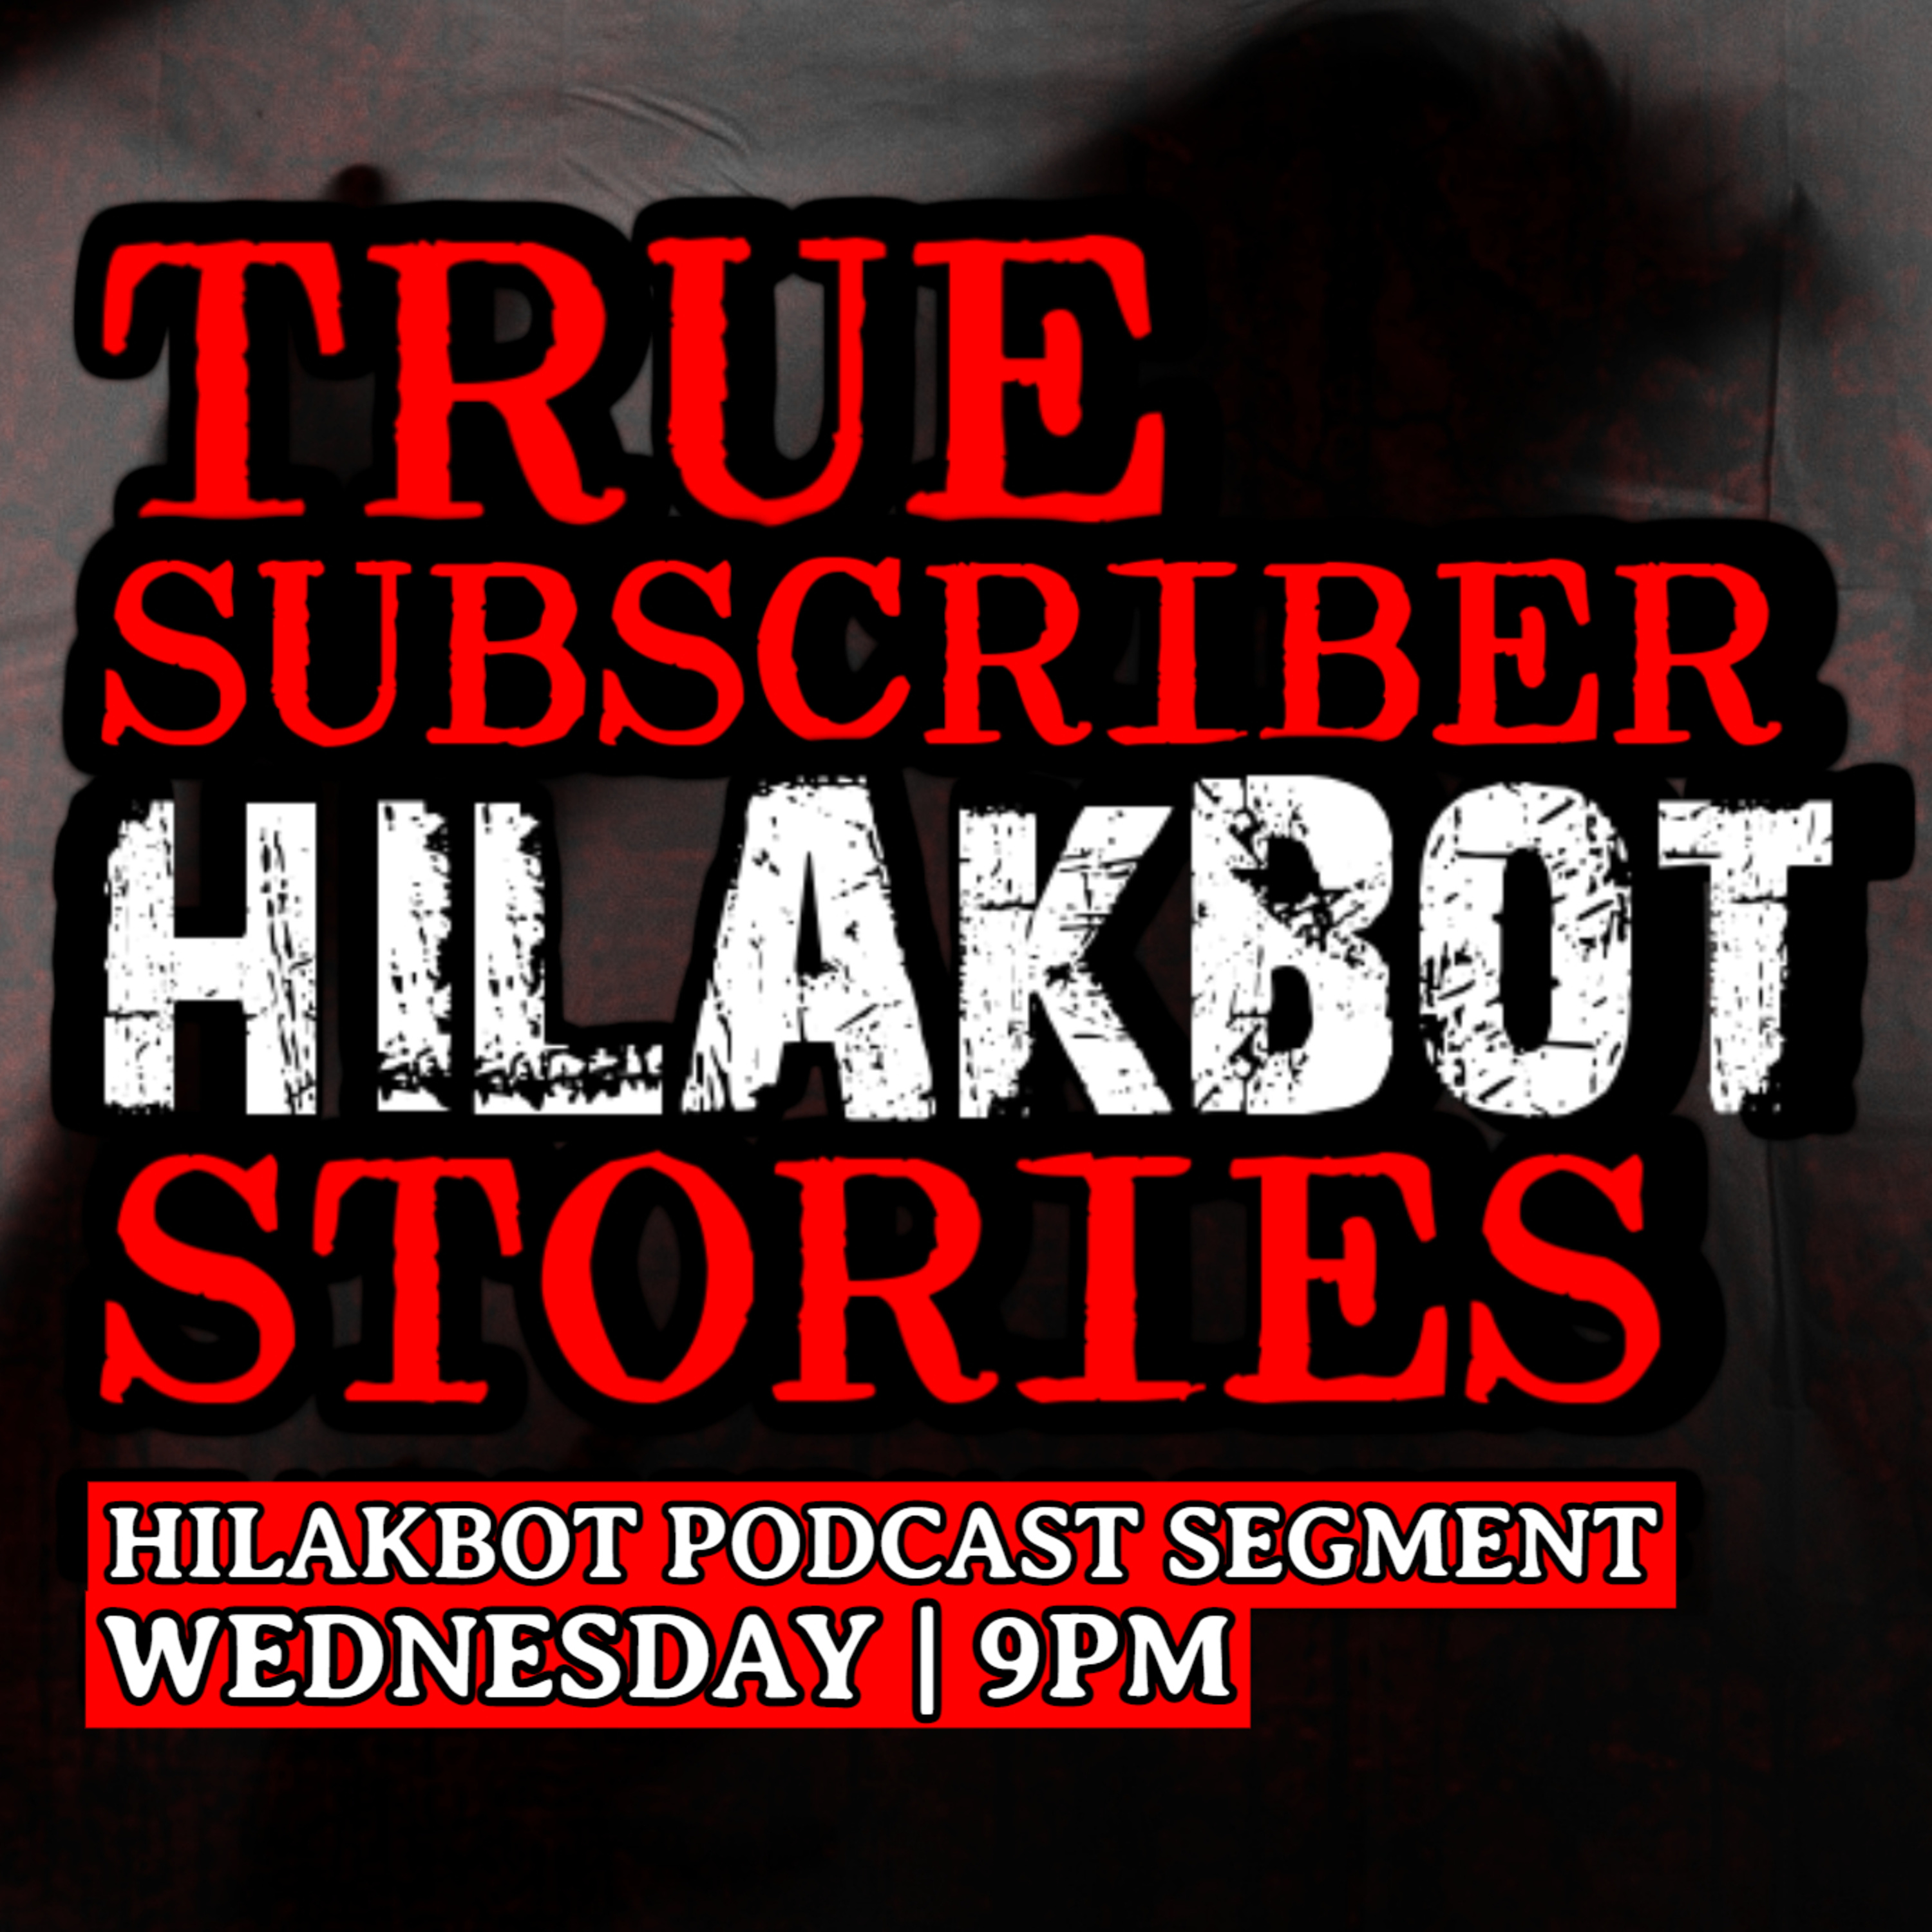 TRUE SUBSCRIBER'S HILAKBOT STORIES 23 | Listener's Submitted Scary Stories | HTV Segment